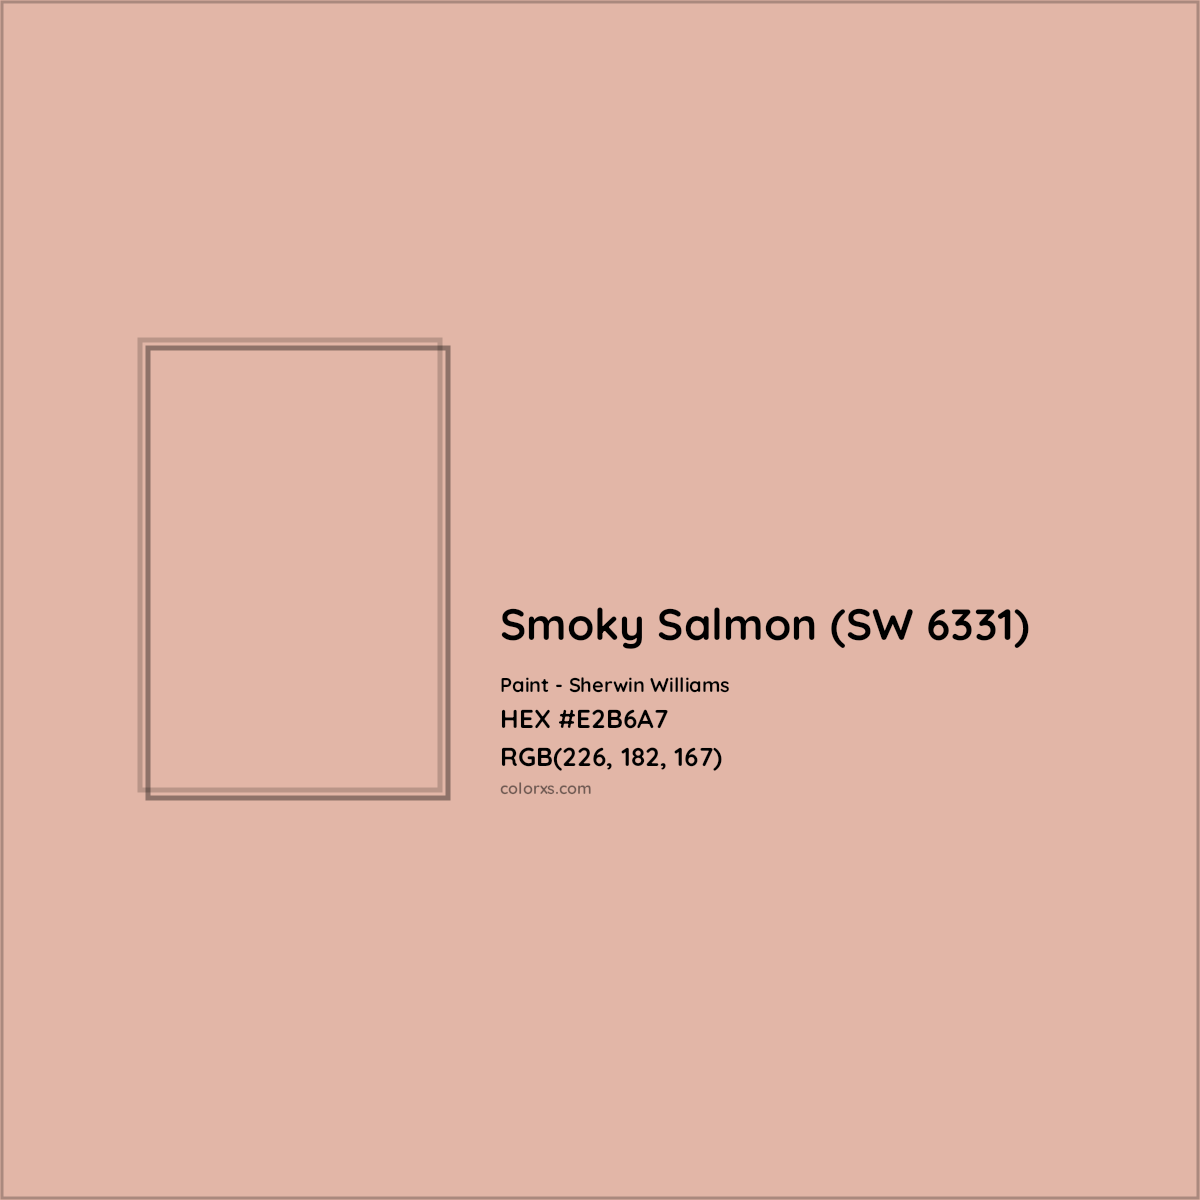 HEX #E2B6A7 Smoky Salmon (SW 6331) Paint Sherwin Williams - Color Code